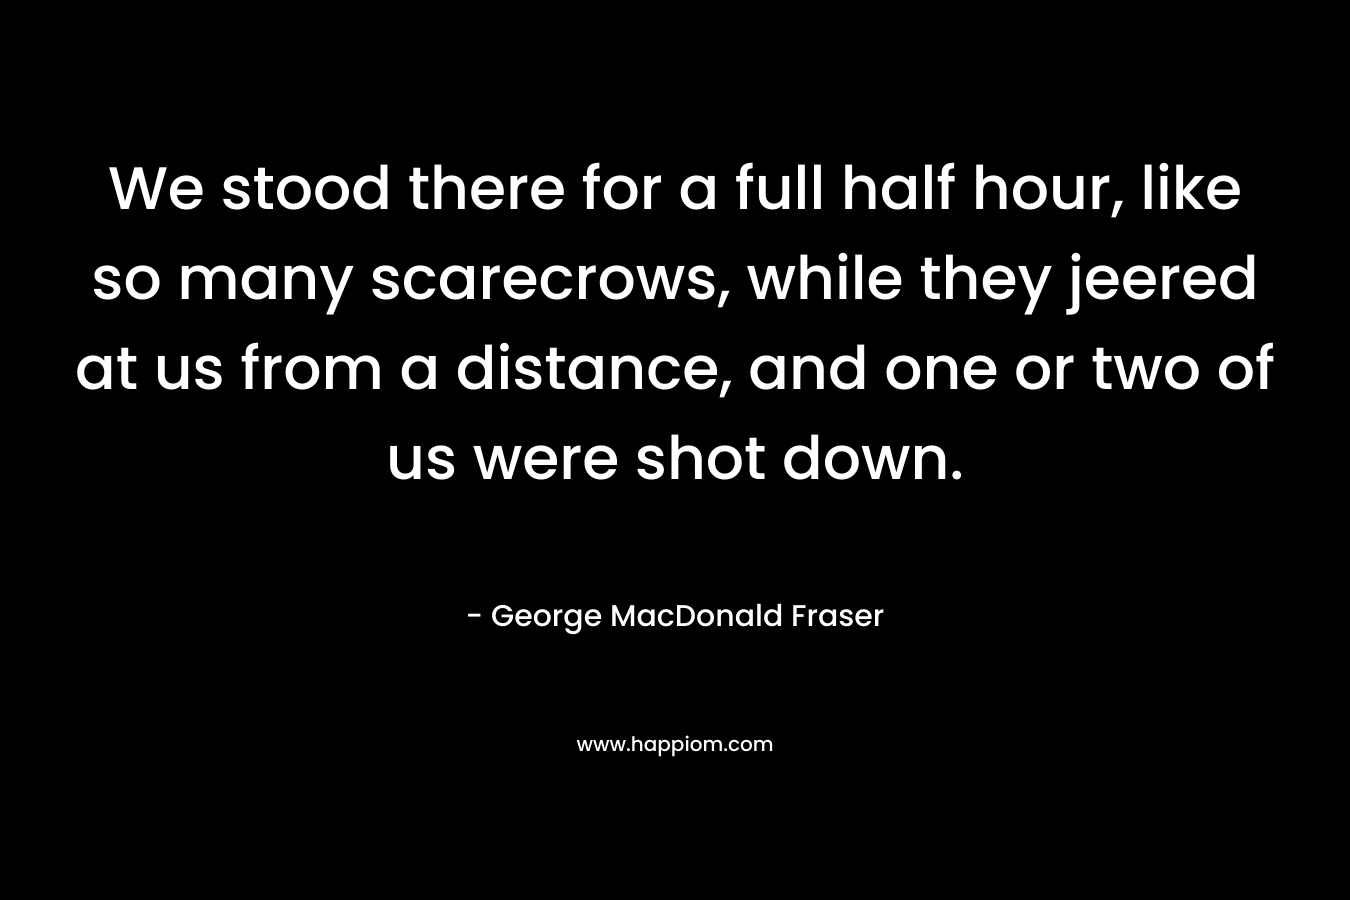 We stood there for a full half hour, like so many scarecrows, while they jeered at us from a distance, and one or two of us were shot down. – George MacDonald Fraser